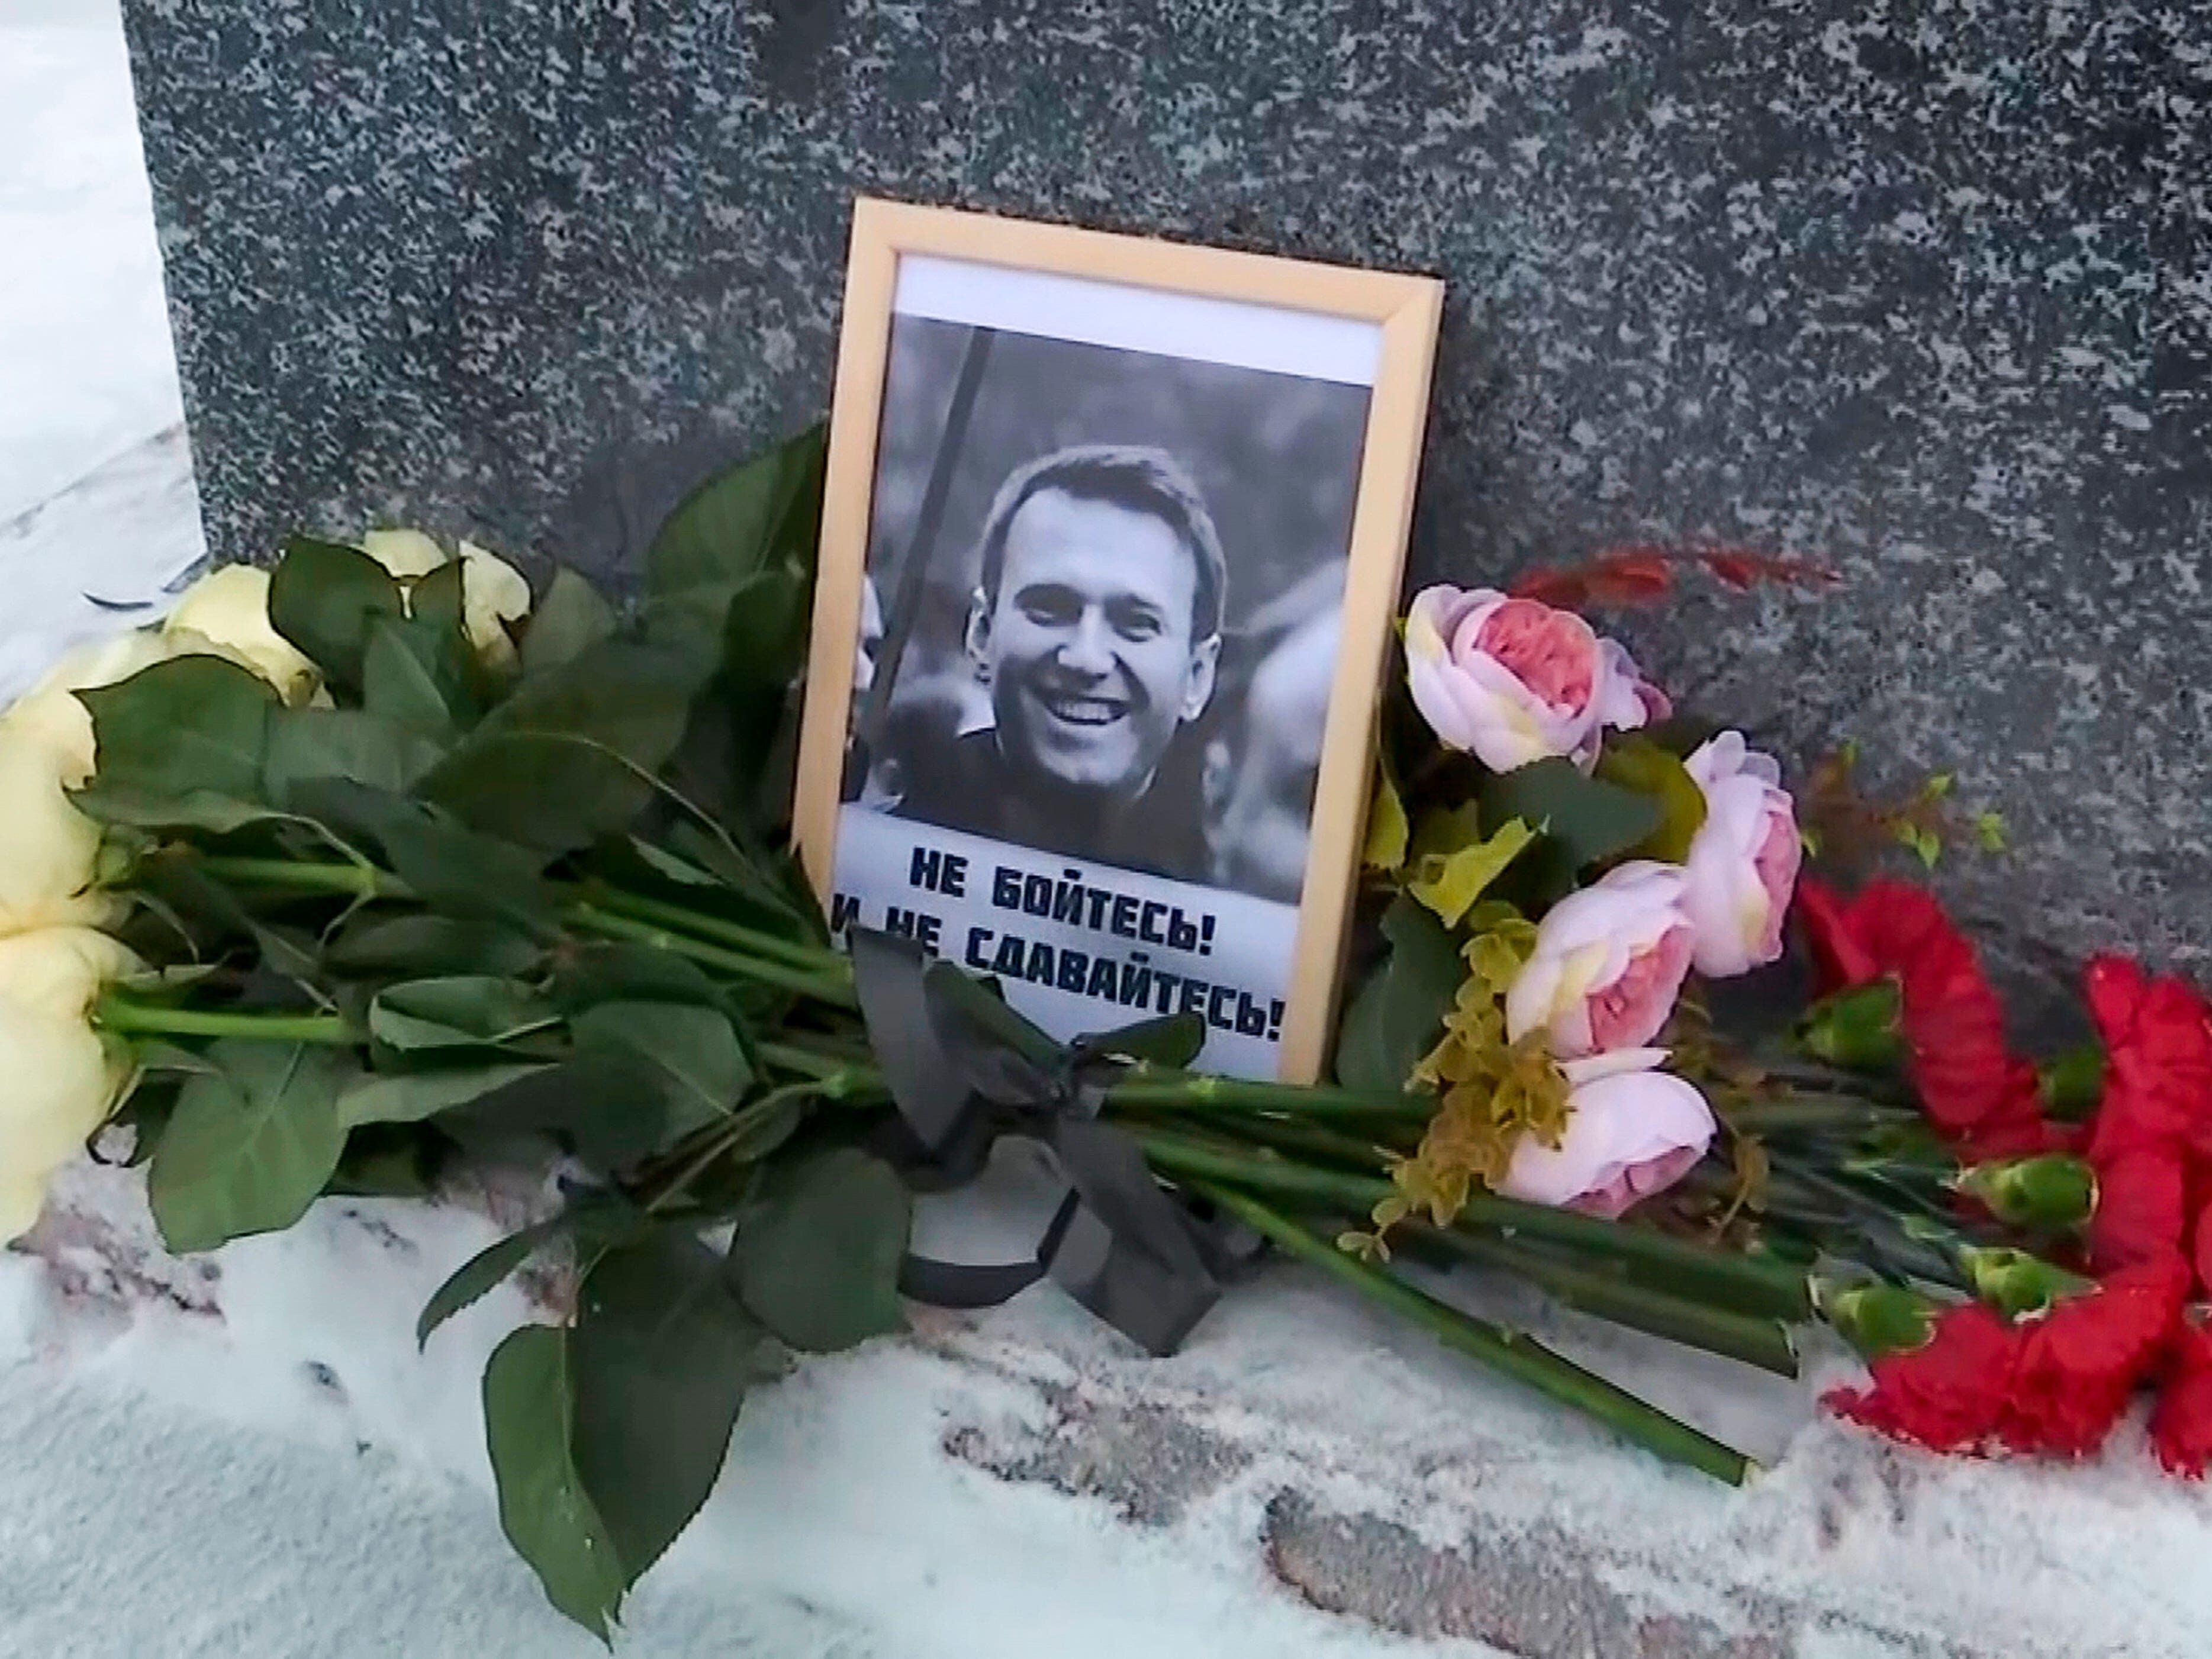 Alexei Navalny’s mother says she is resisting pressure to agree to secret burial